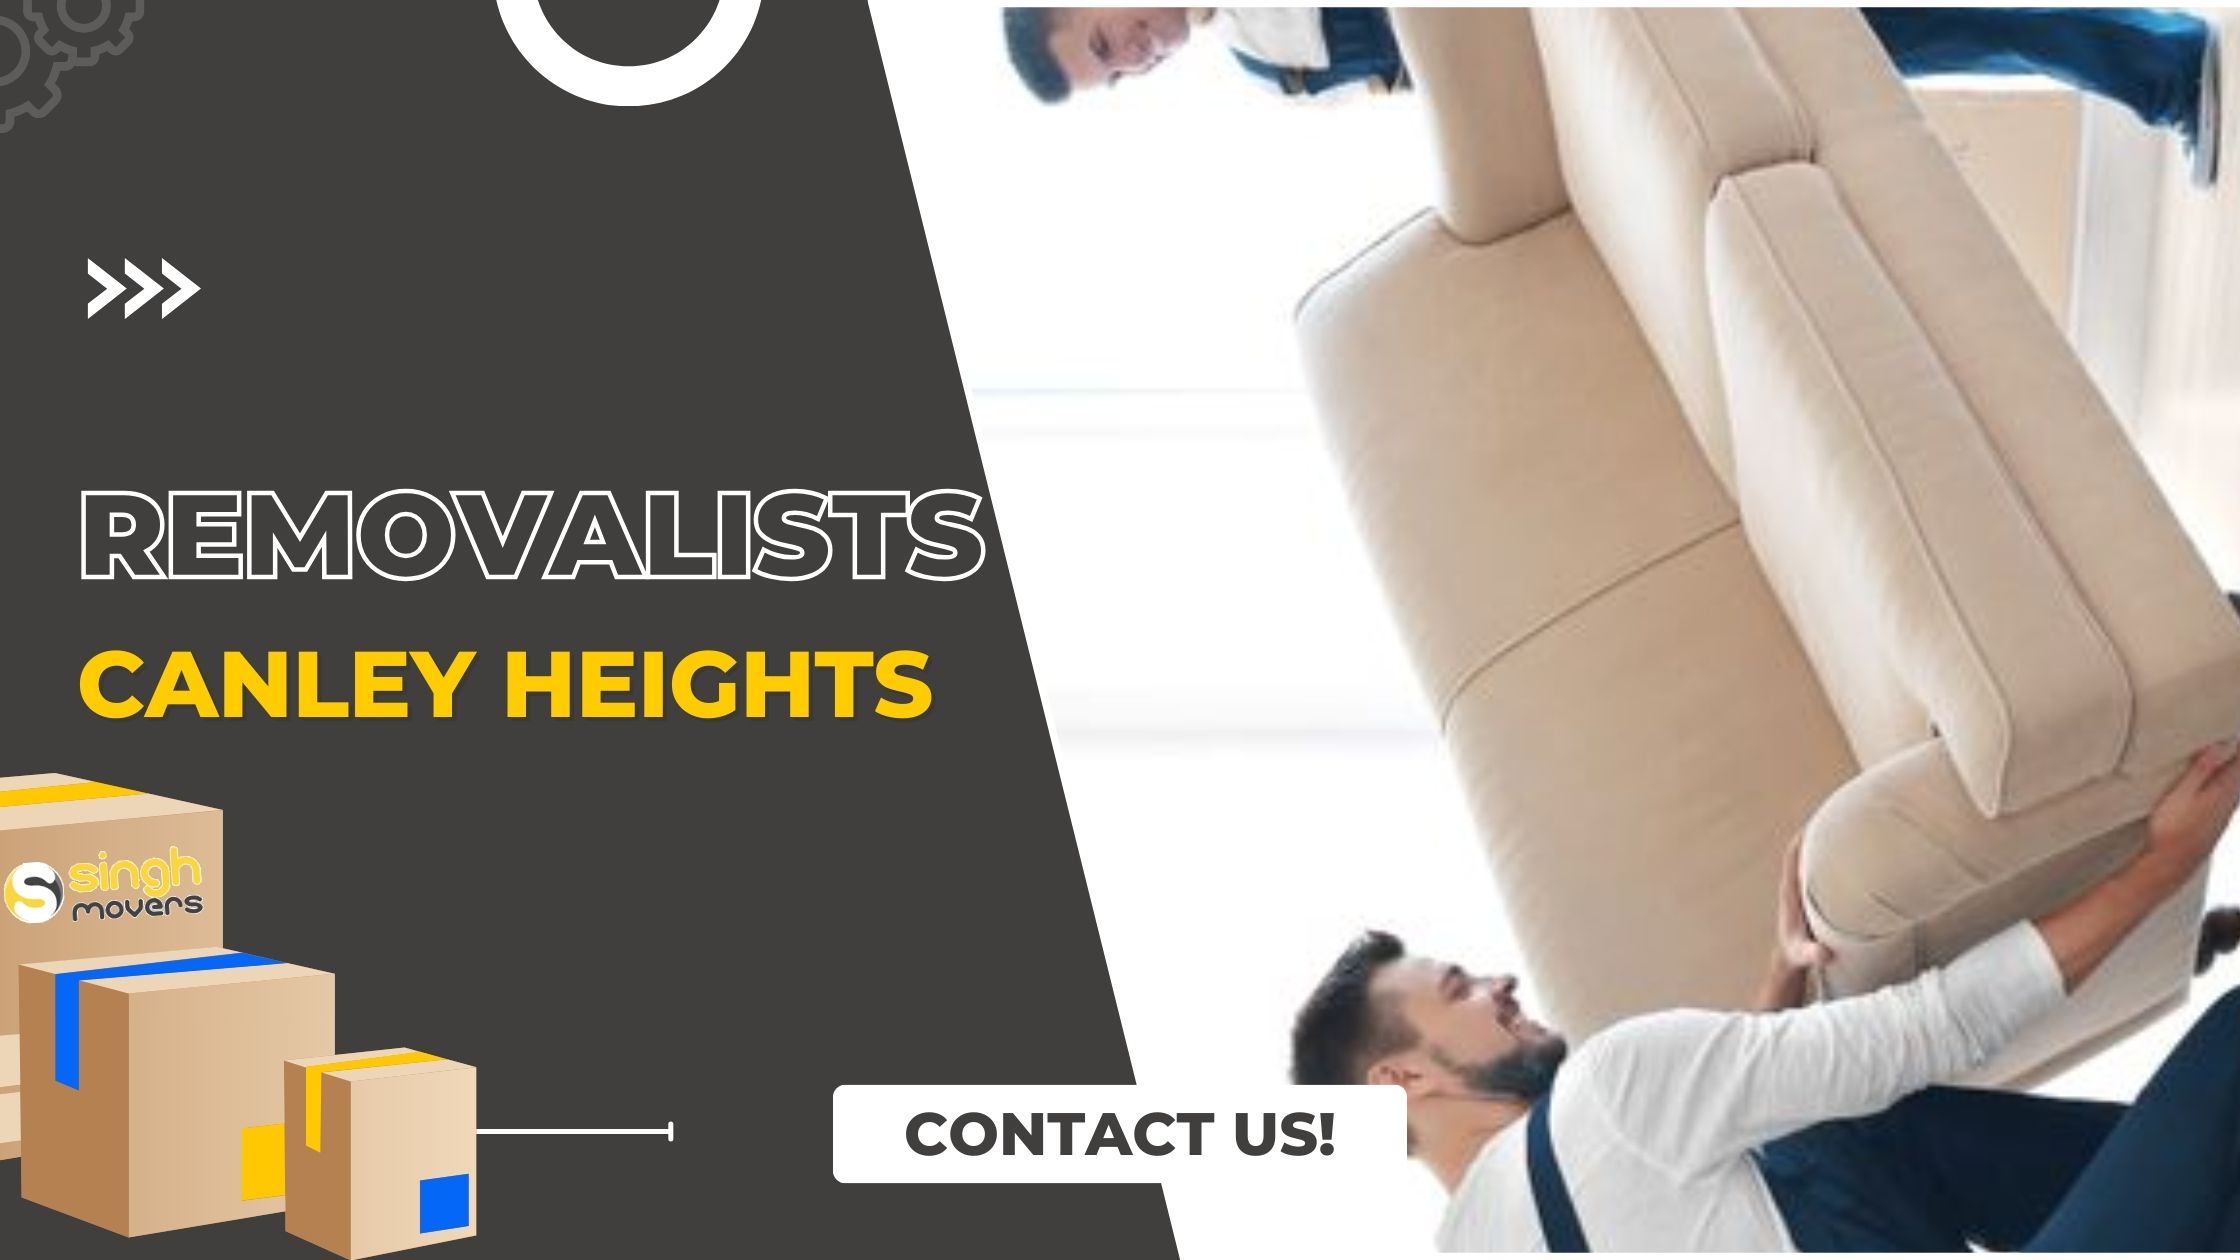 Removalists Canley Heights